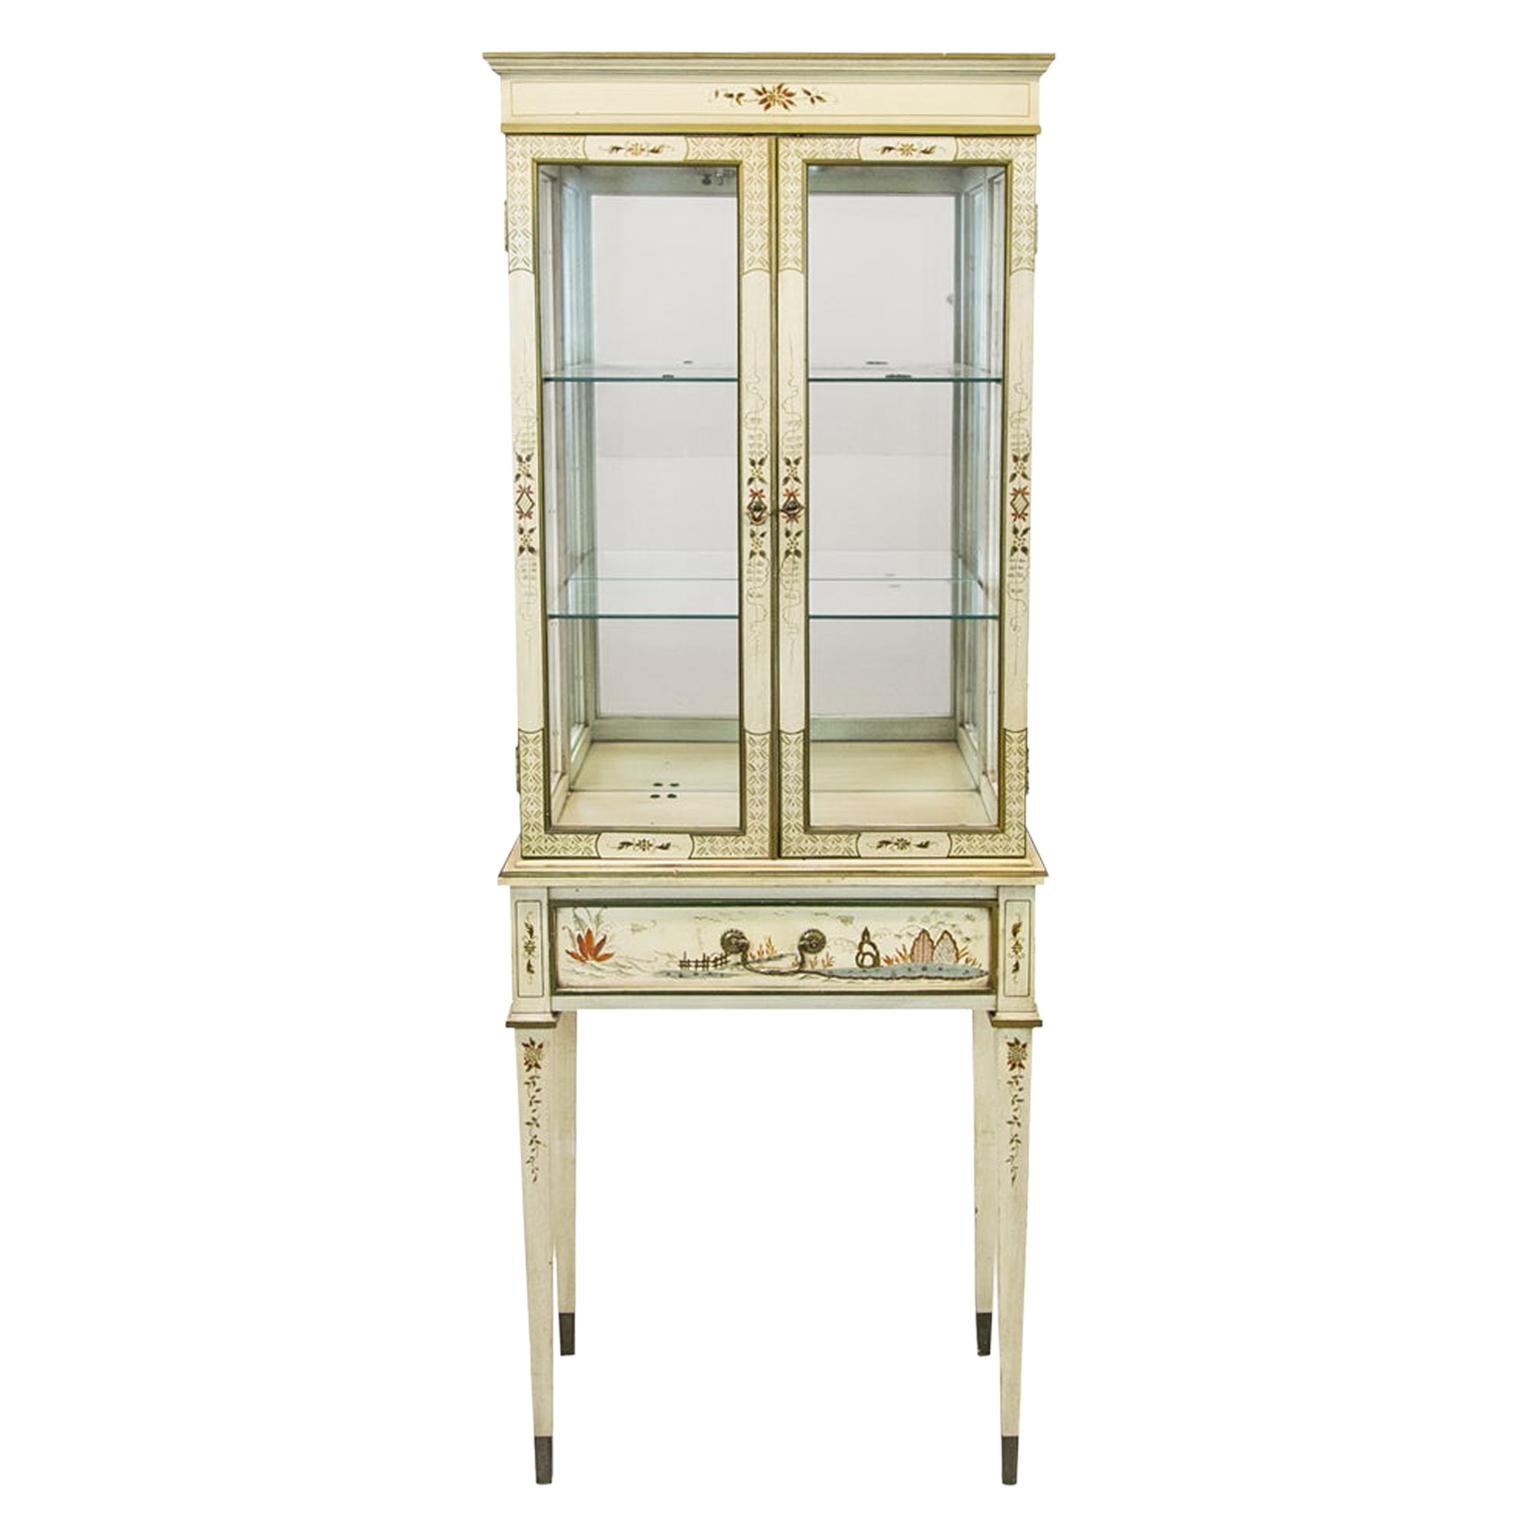 English Cream Colored Chinoiserie Display Case For Sale At 1stdibs